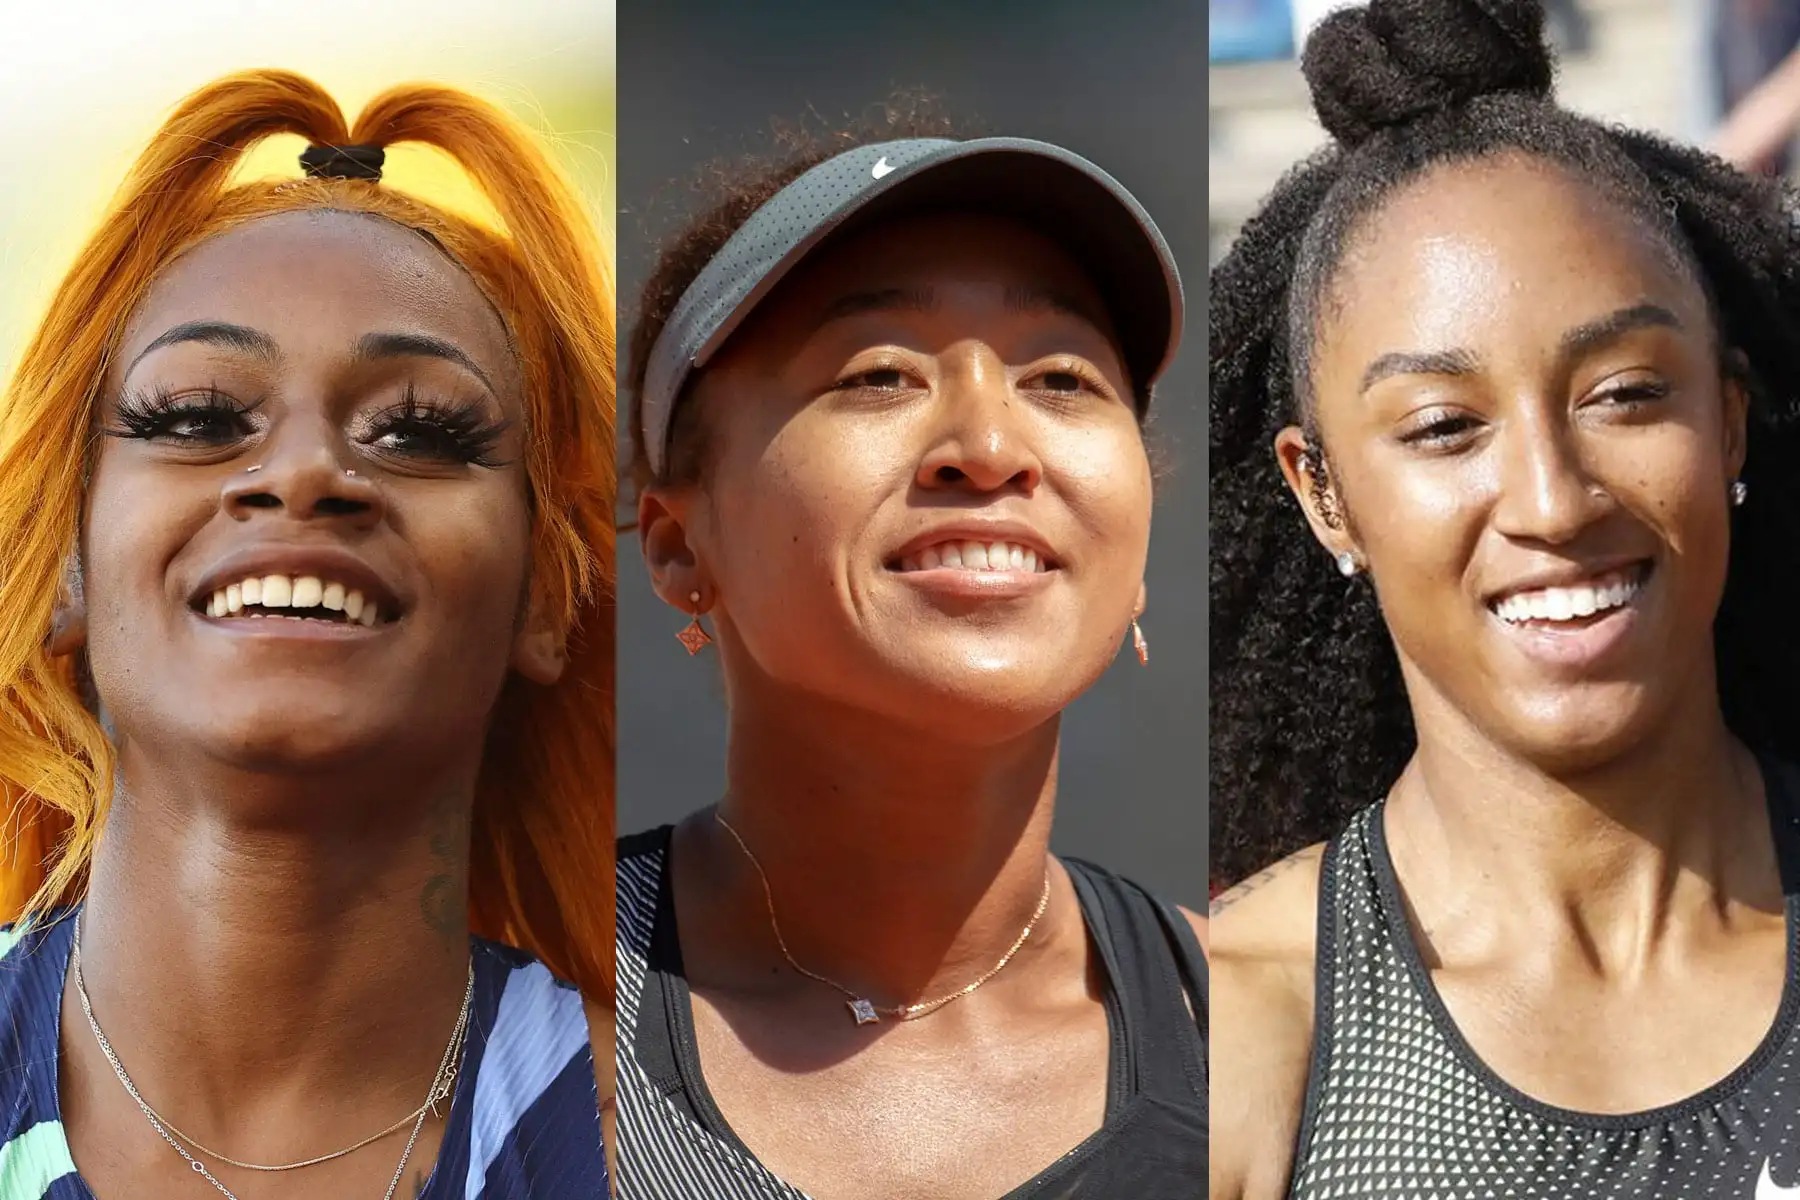 Brianna McNeal, Sha'Carri Richardson, and Other Women Track Stars Deserve  Better